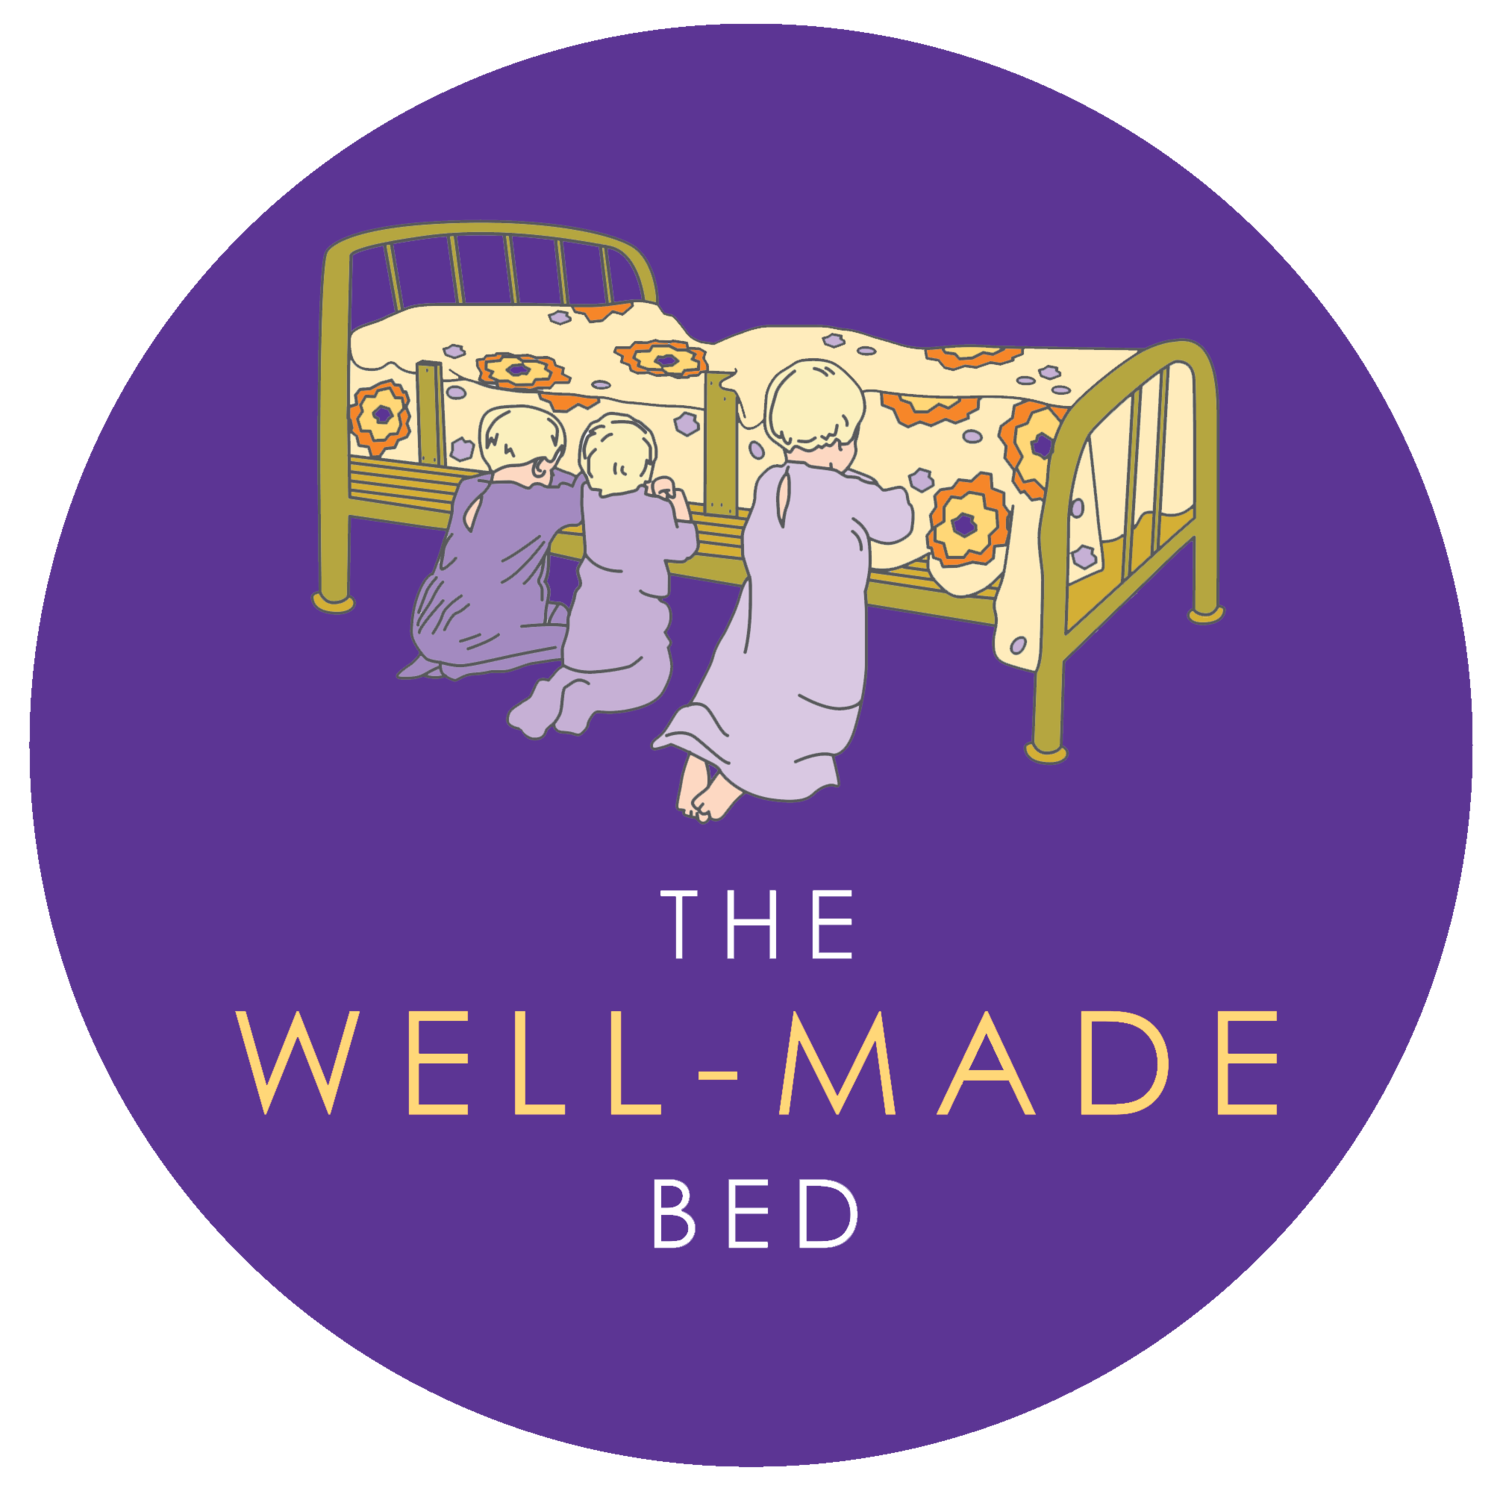 The Well-Made Bed